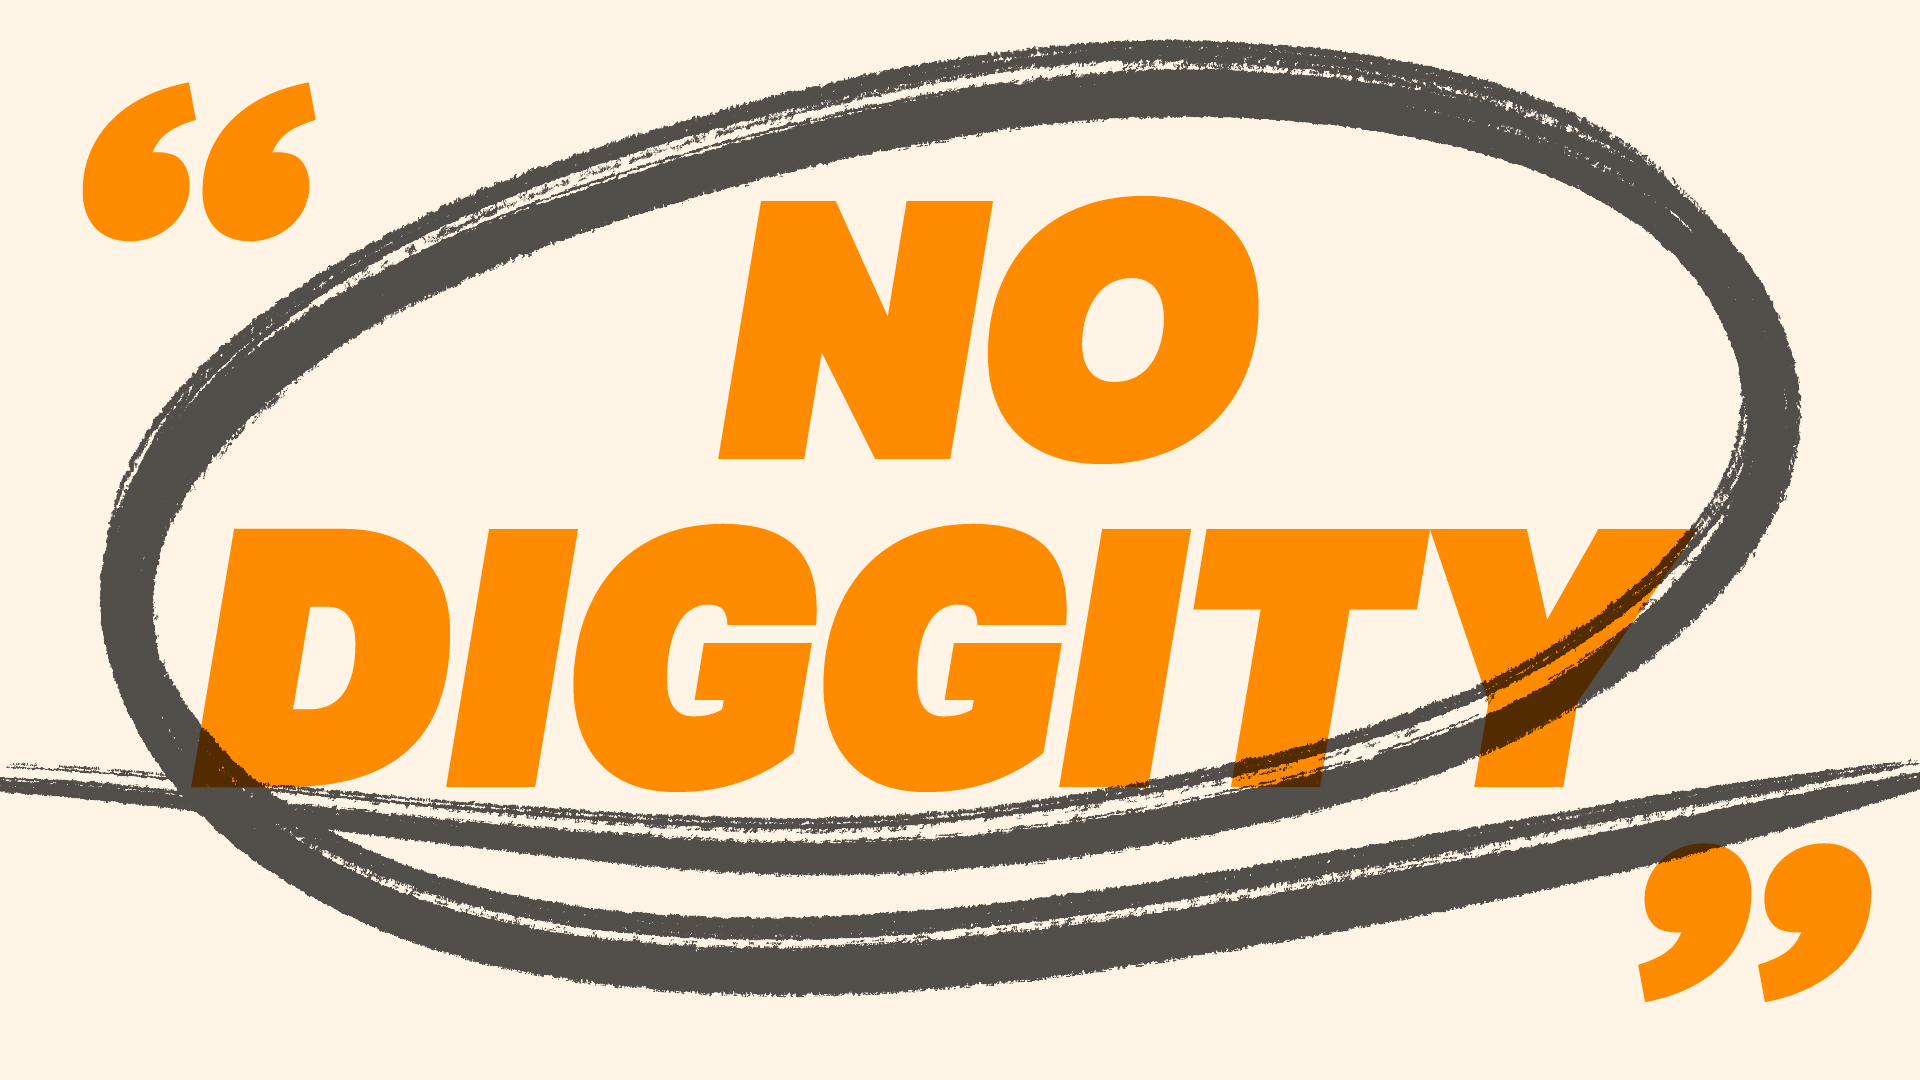 no diggity meaning